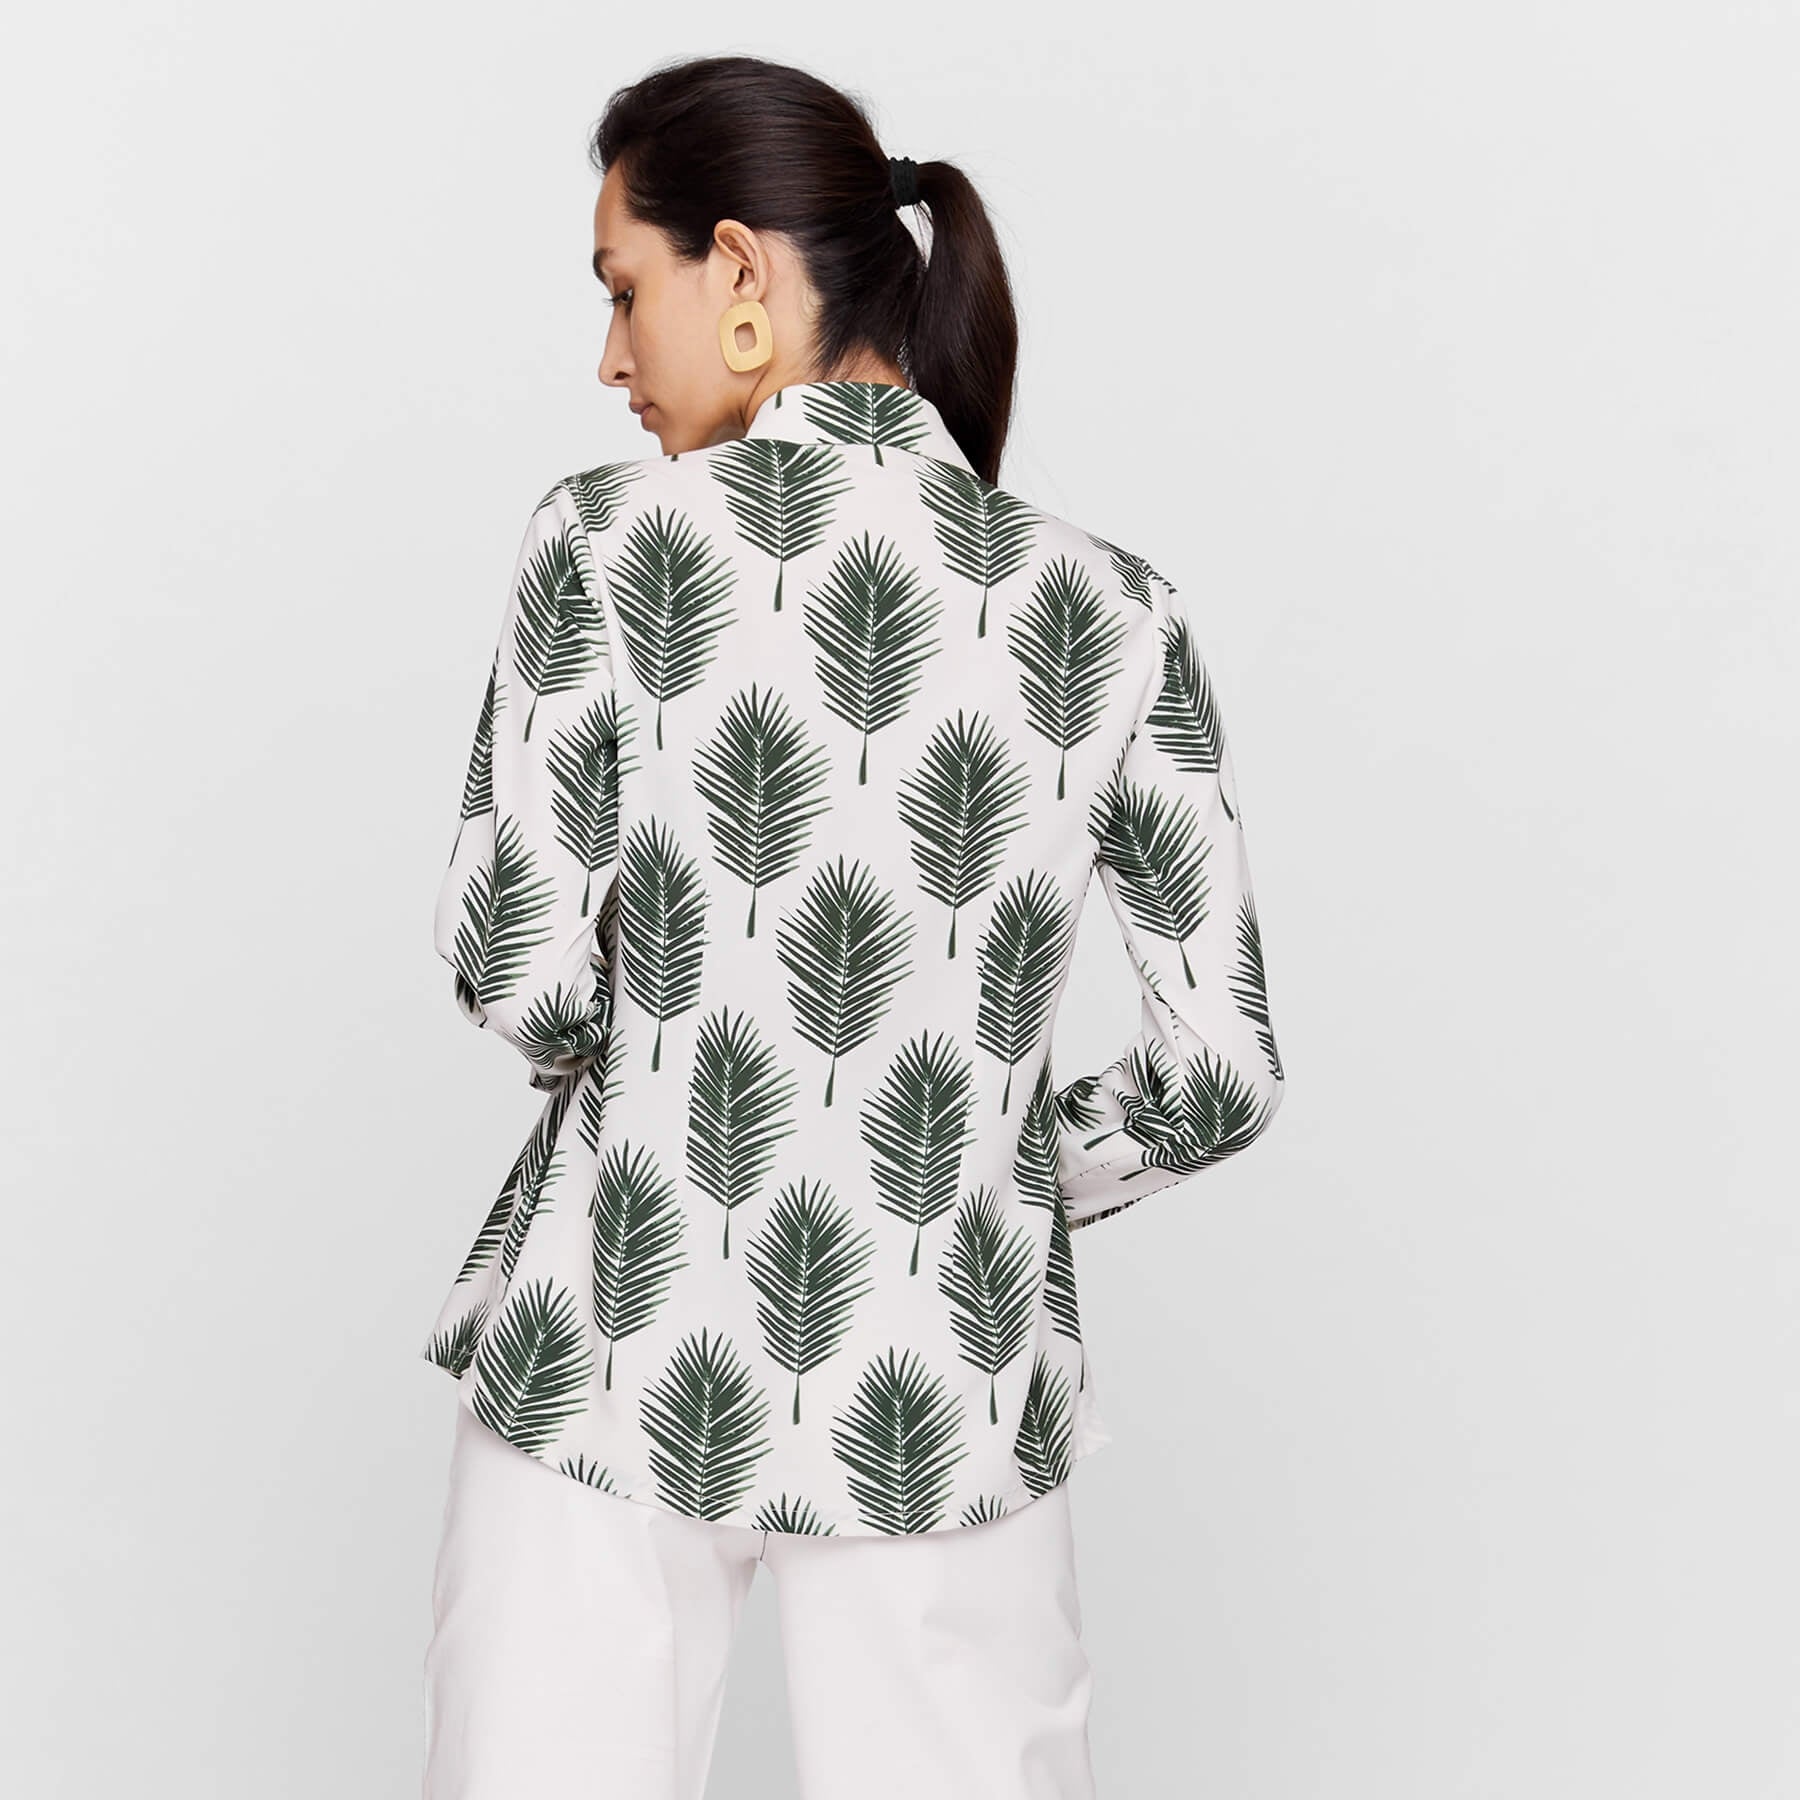 Forest Shirt by Payal Singhal